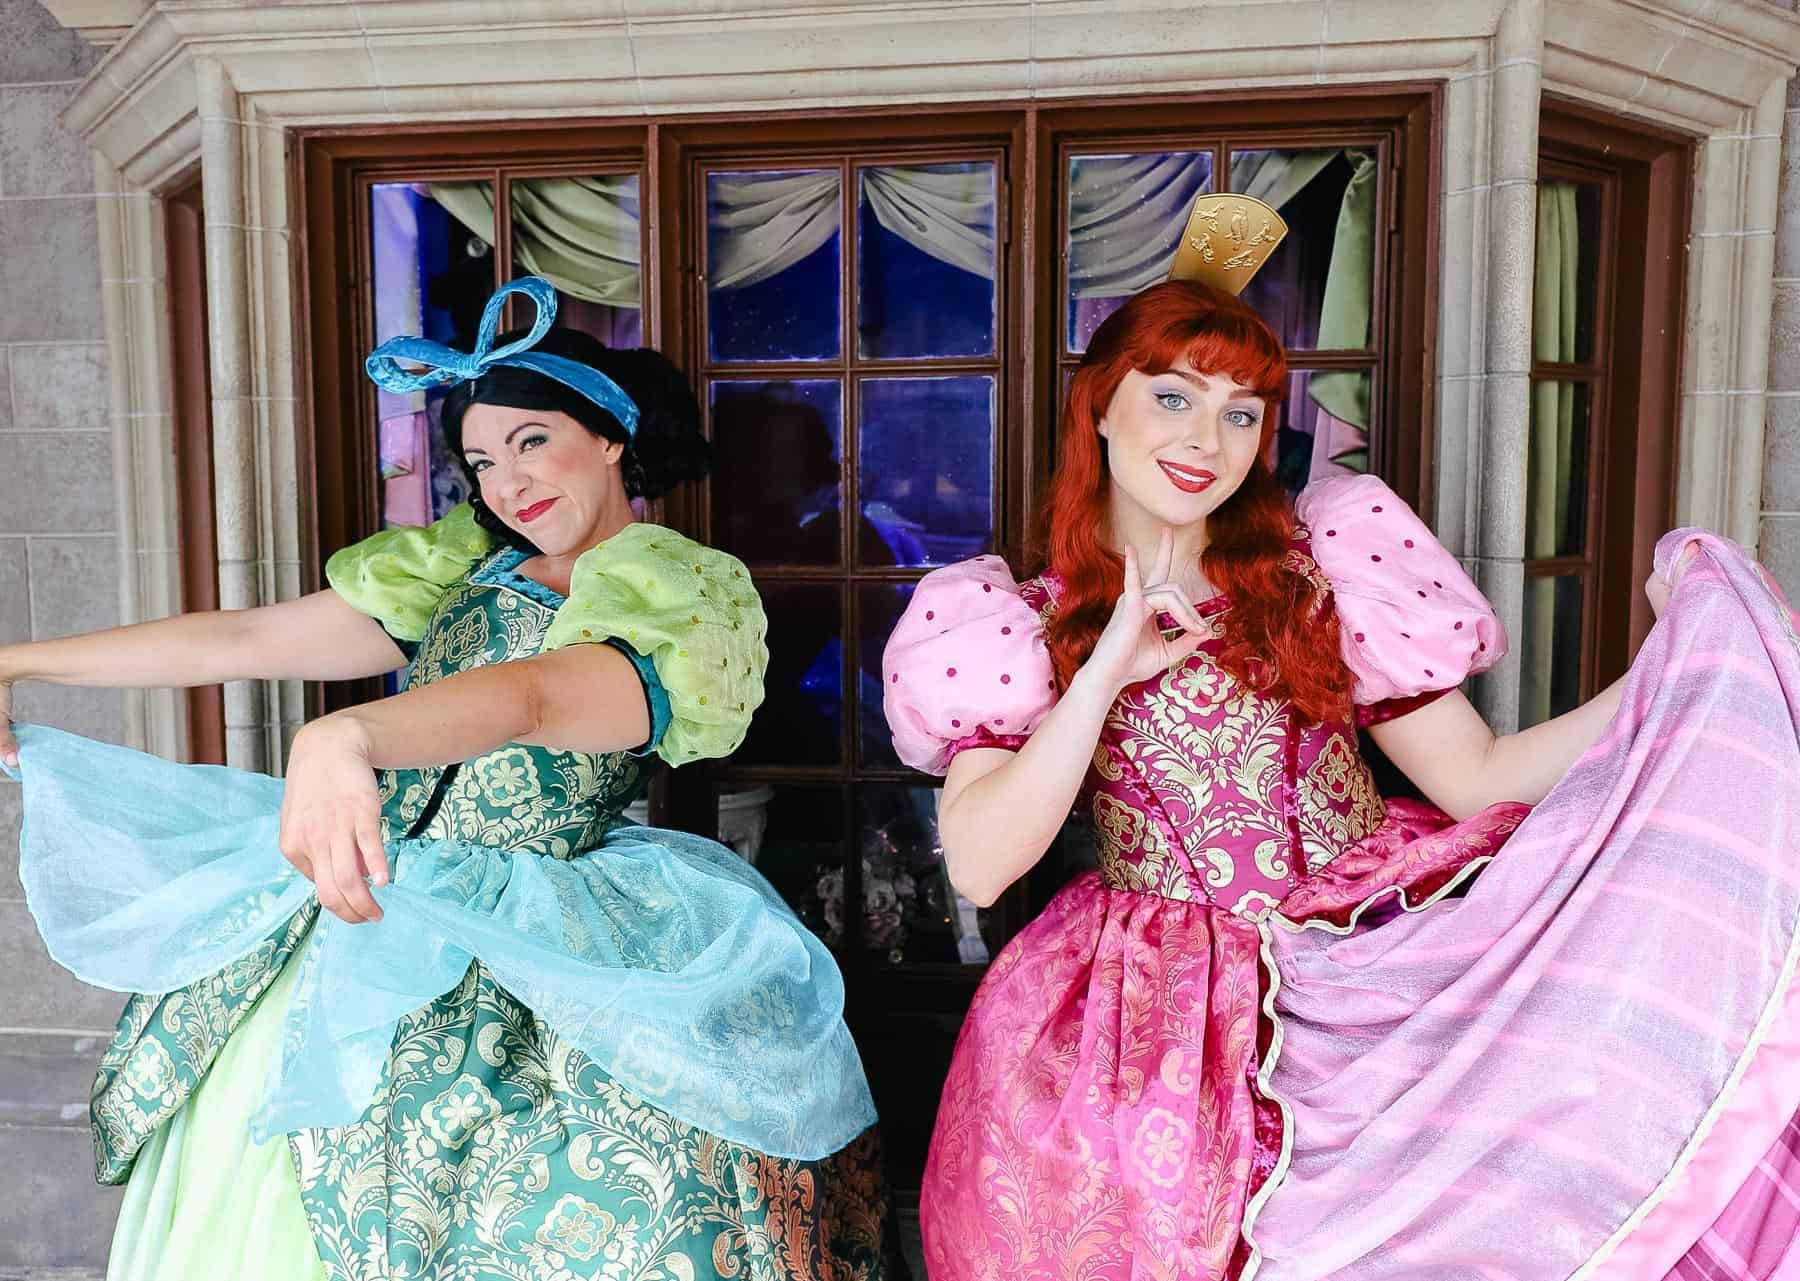 Anastasia wearing her pink dress and Drizella wearing her green dress. 